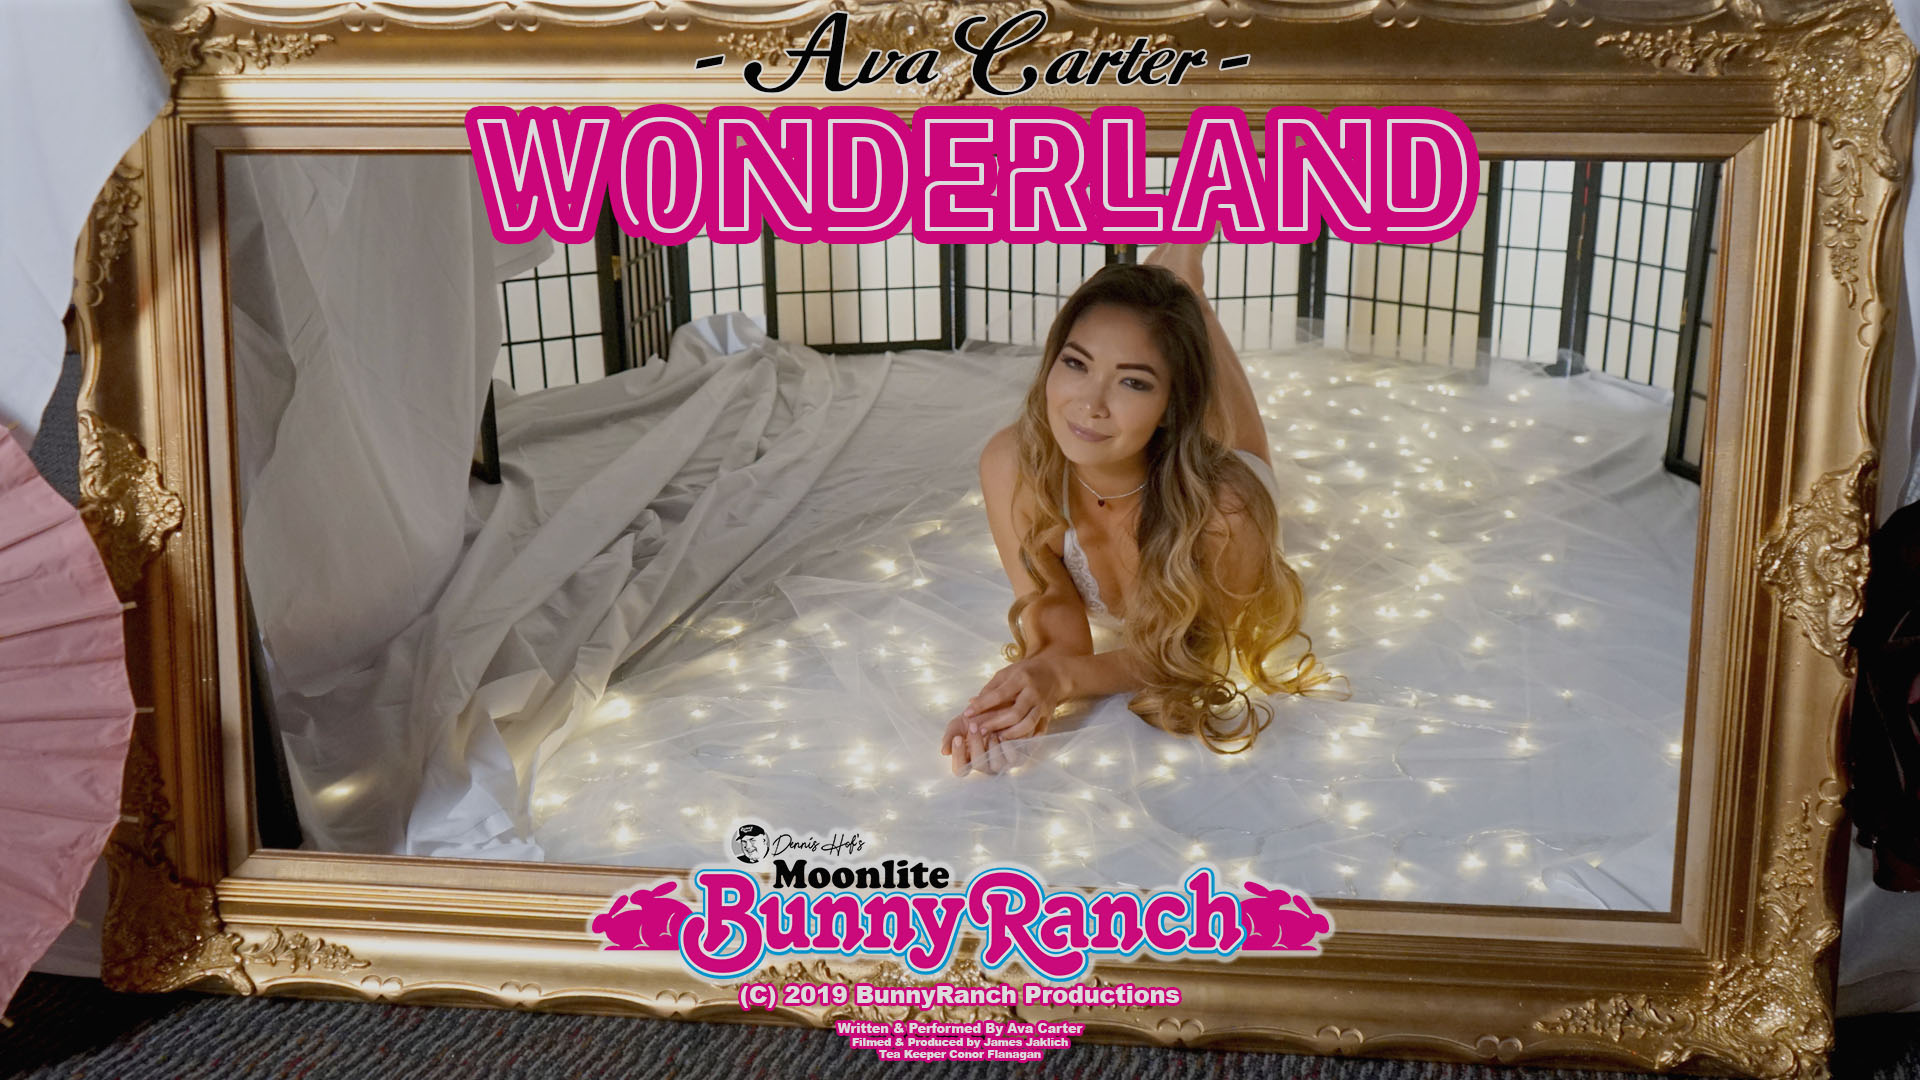 Music Video Features Moonlite Bunnyranch Sex Worker Serving Carson